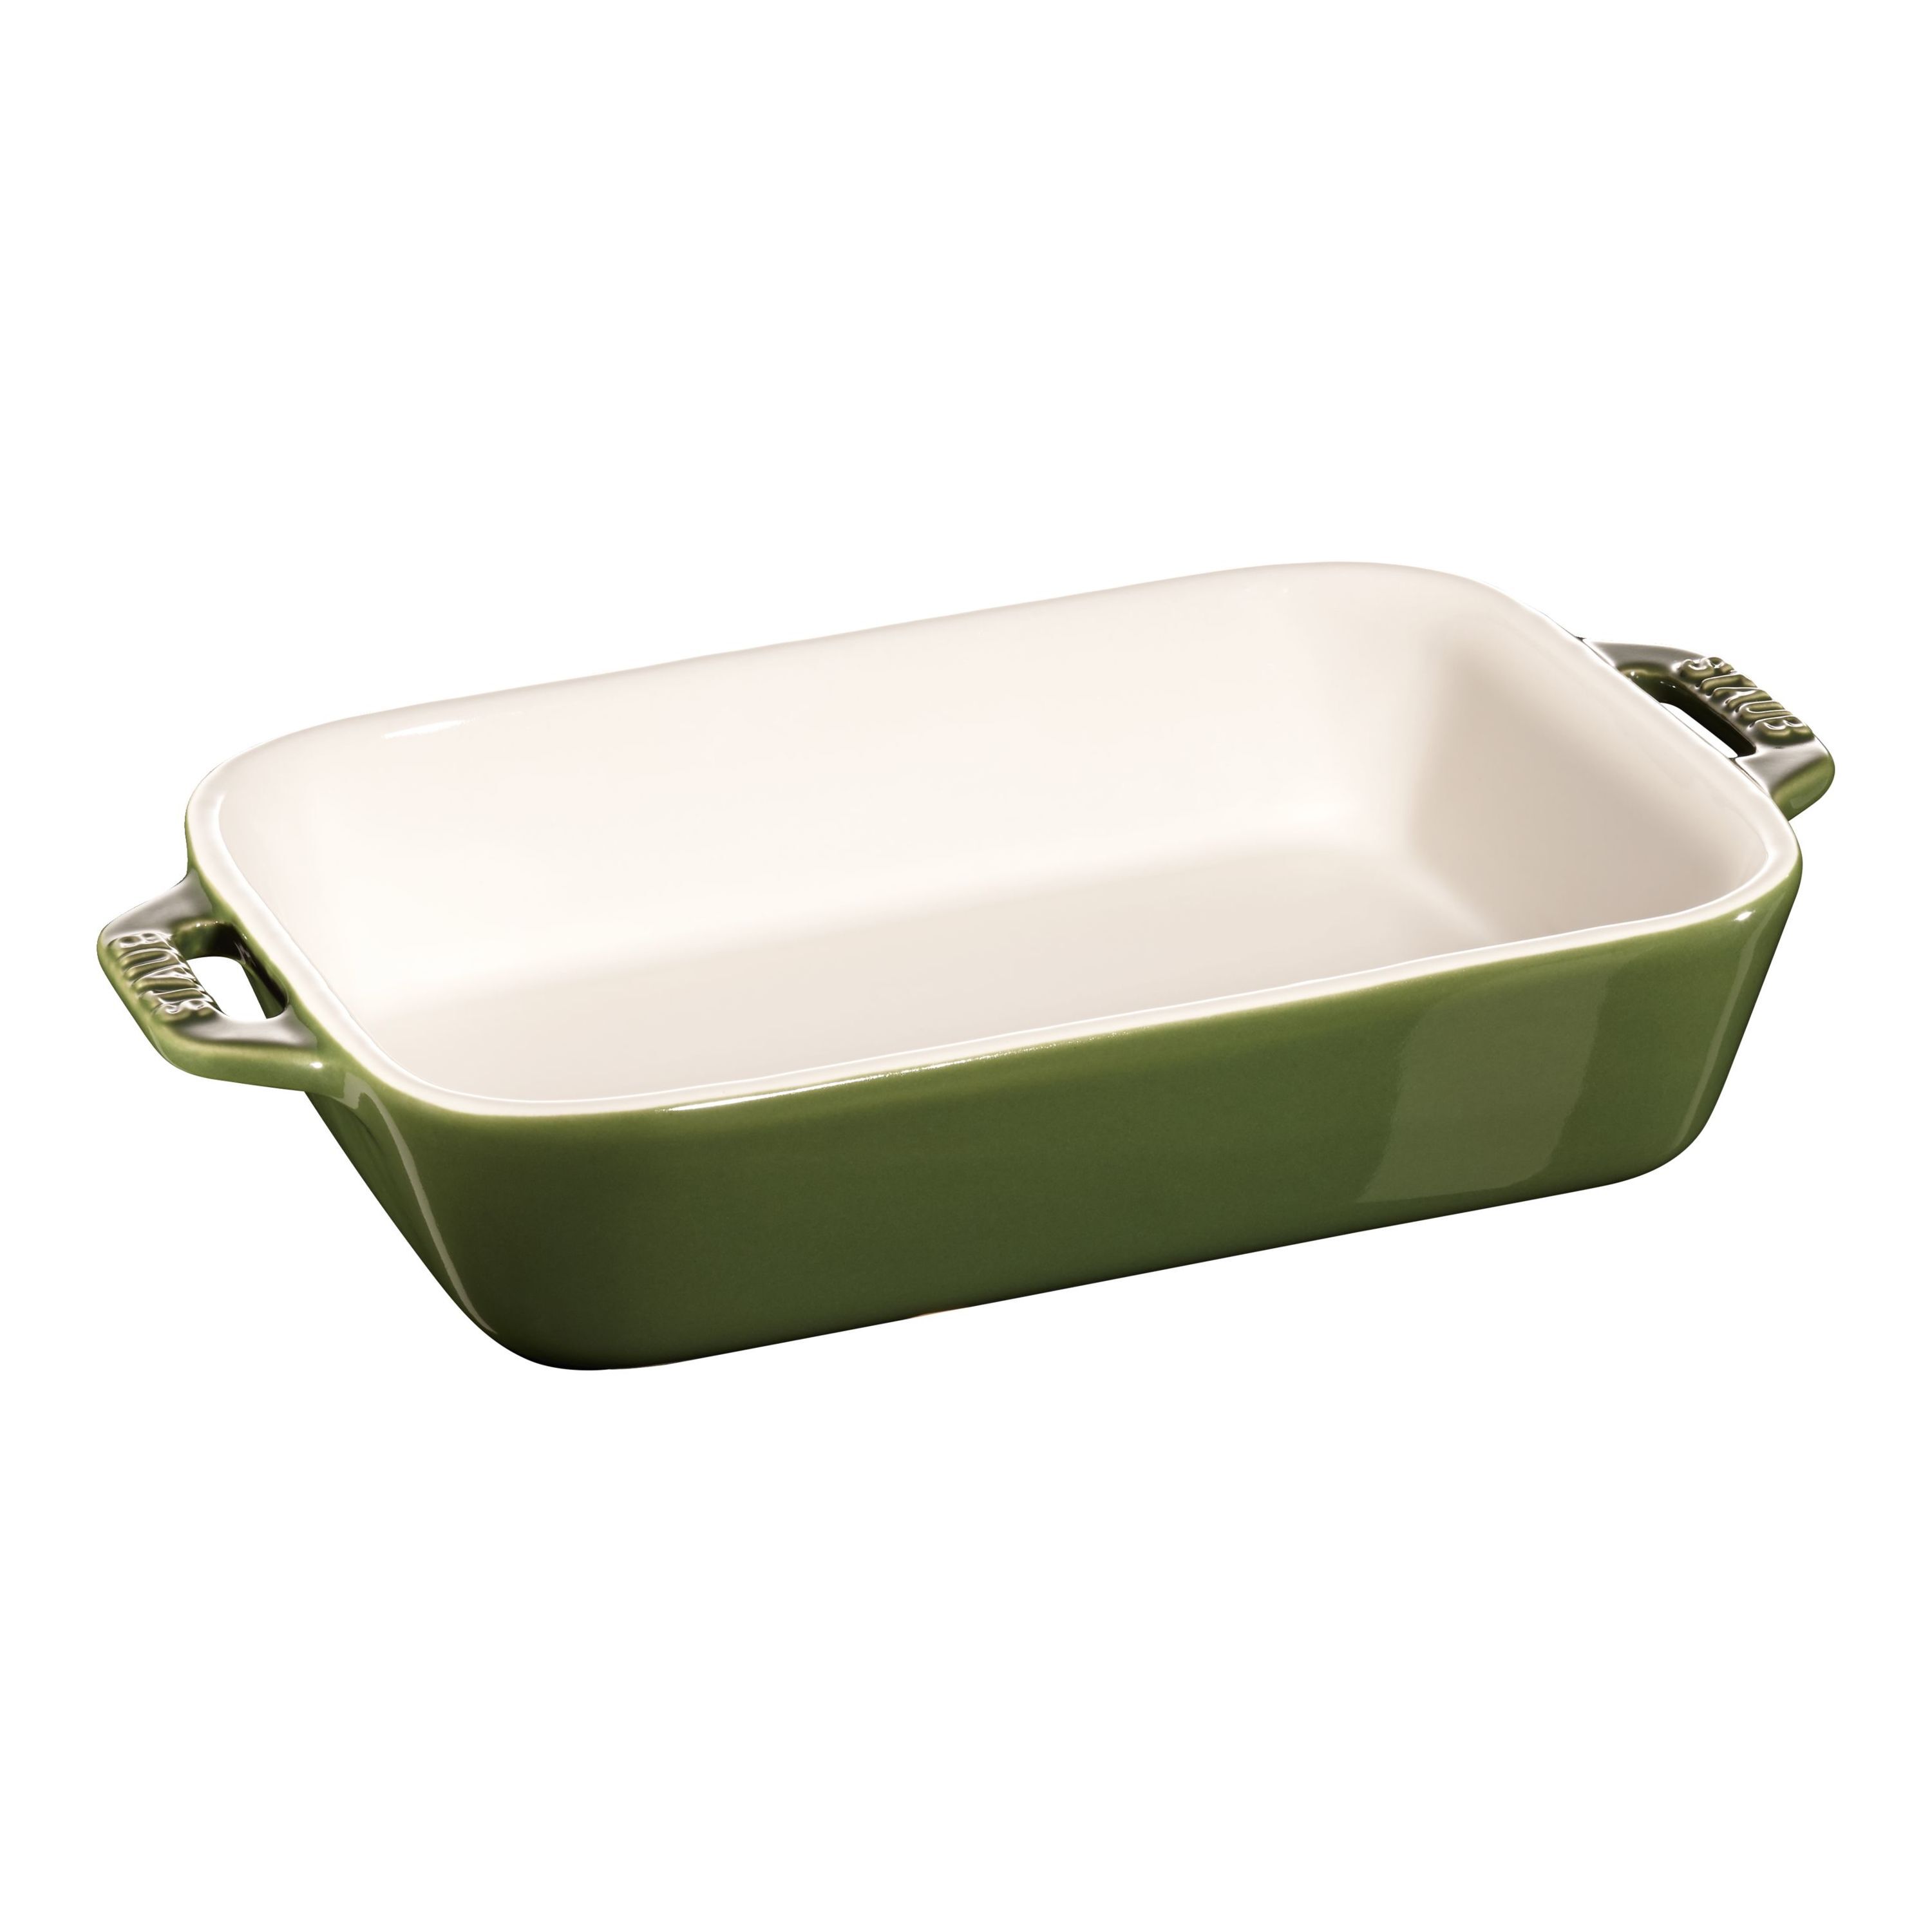 Casserole Rectangular Oven with Ceramic Handles various colours and measures 